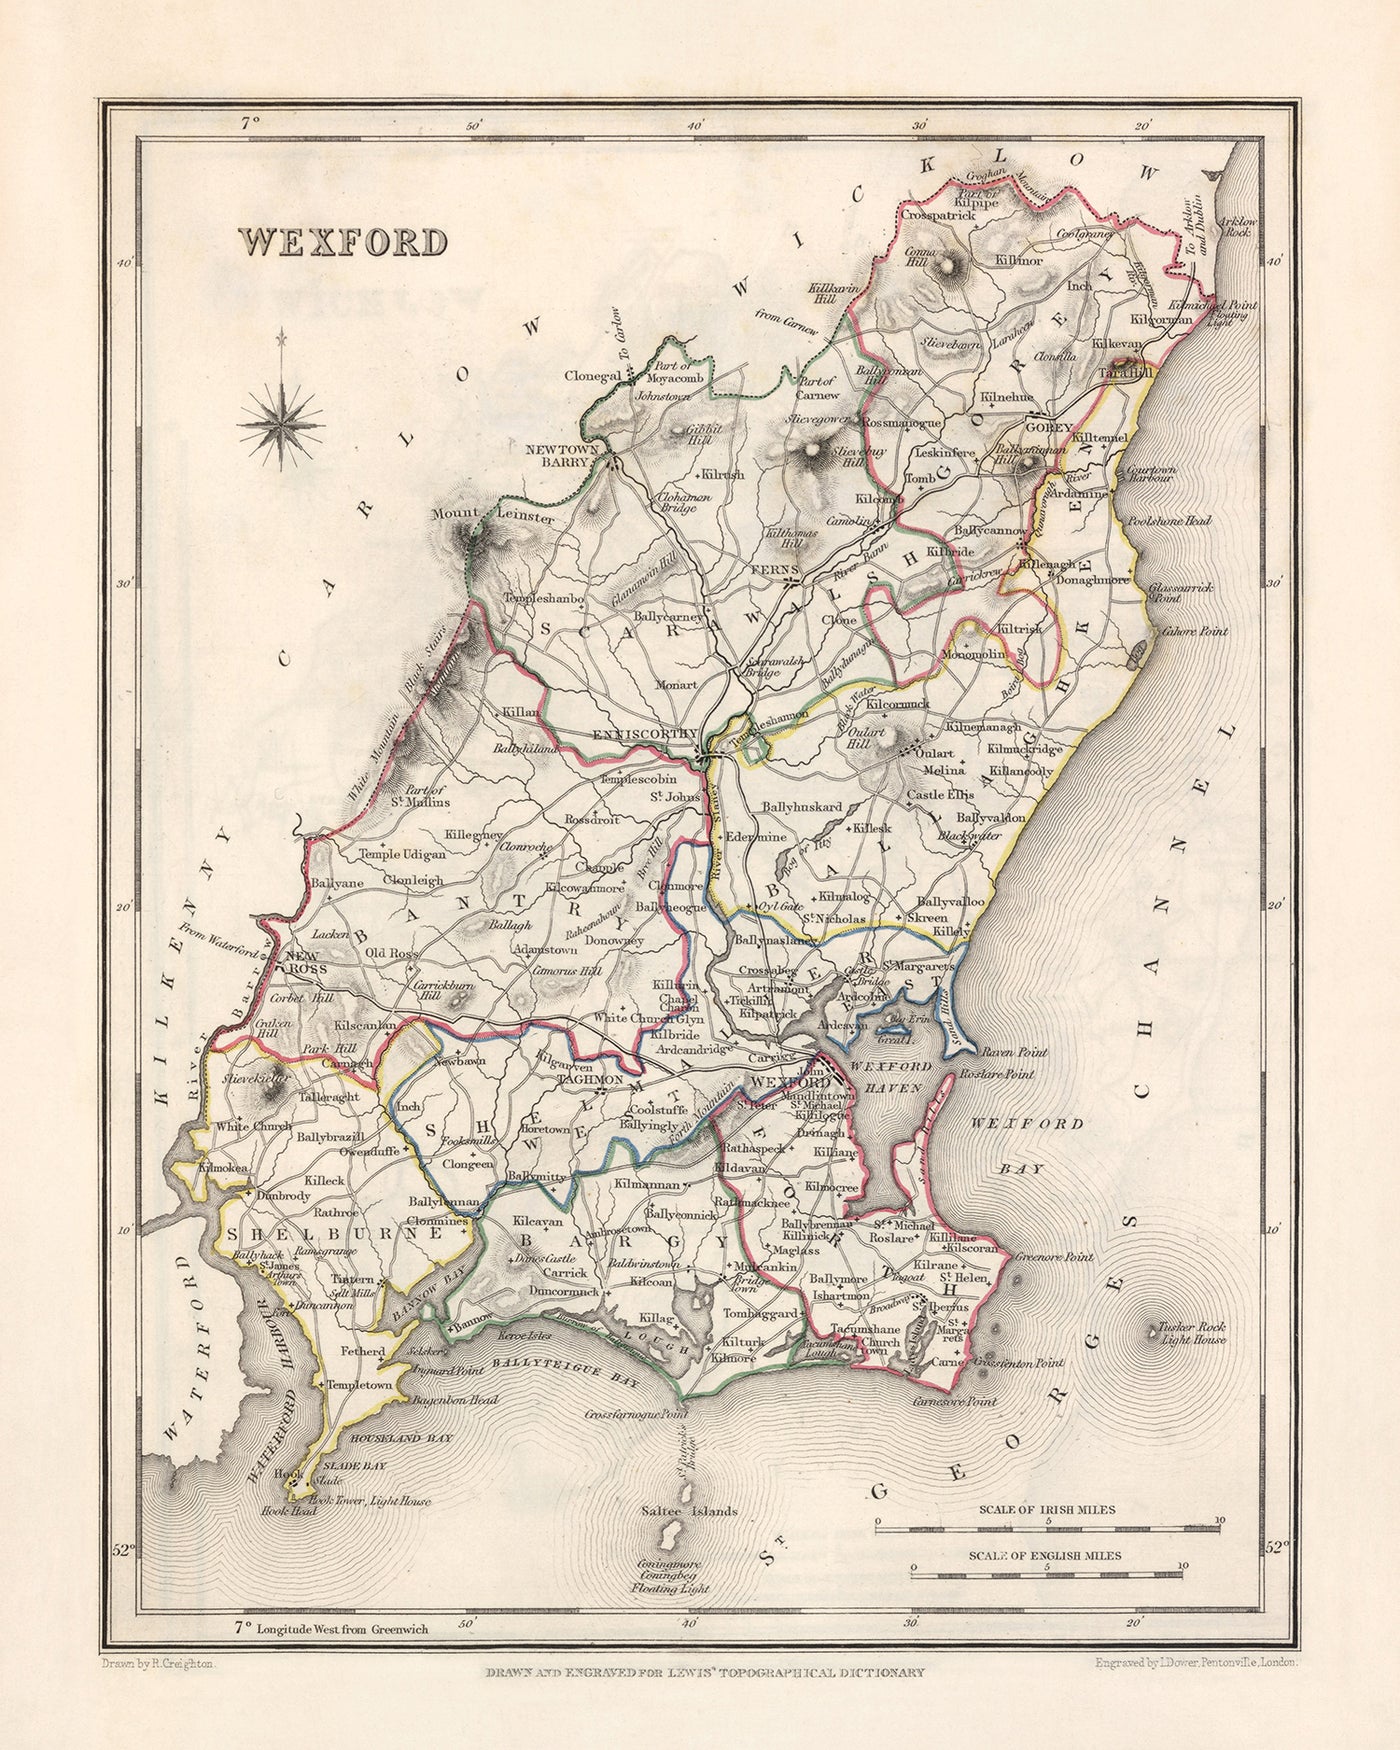 Old Map of County Wexford by Samuel Lewis, 1844: Enniscorthy, New Ross, Gorey, Ferns, and Historical Features